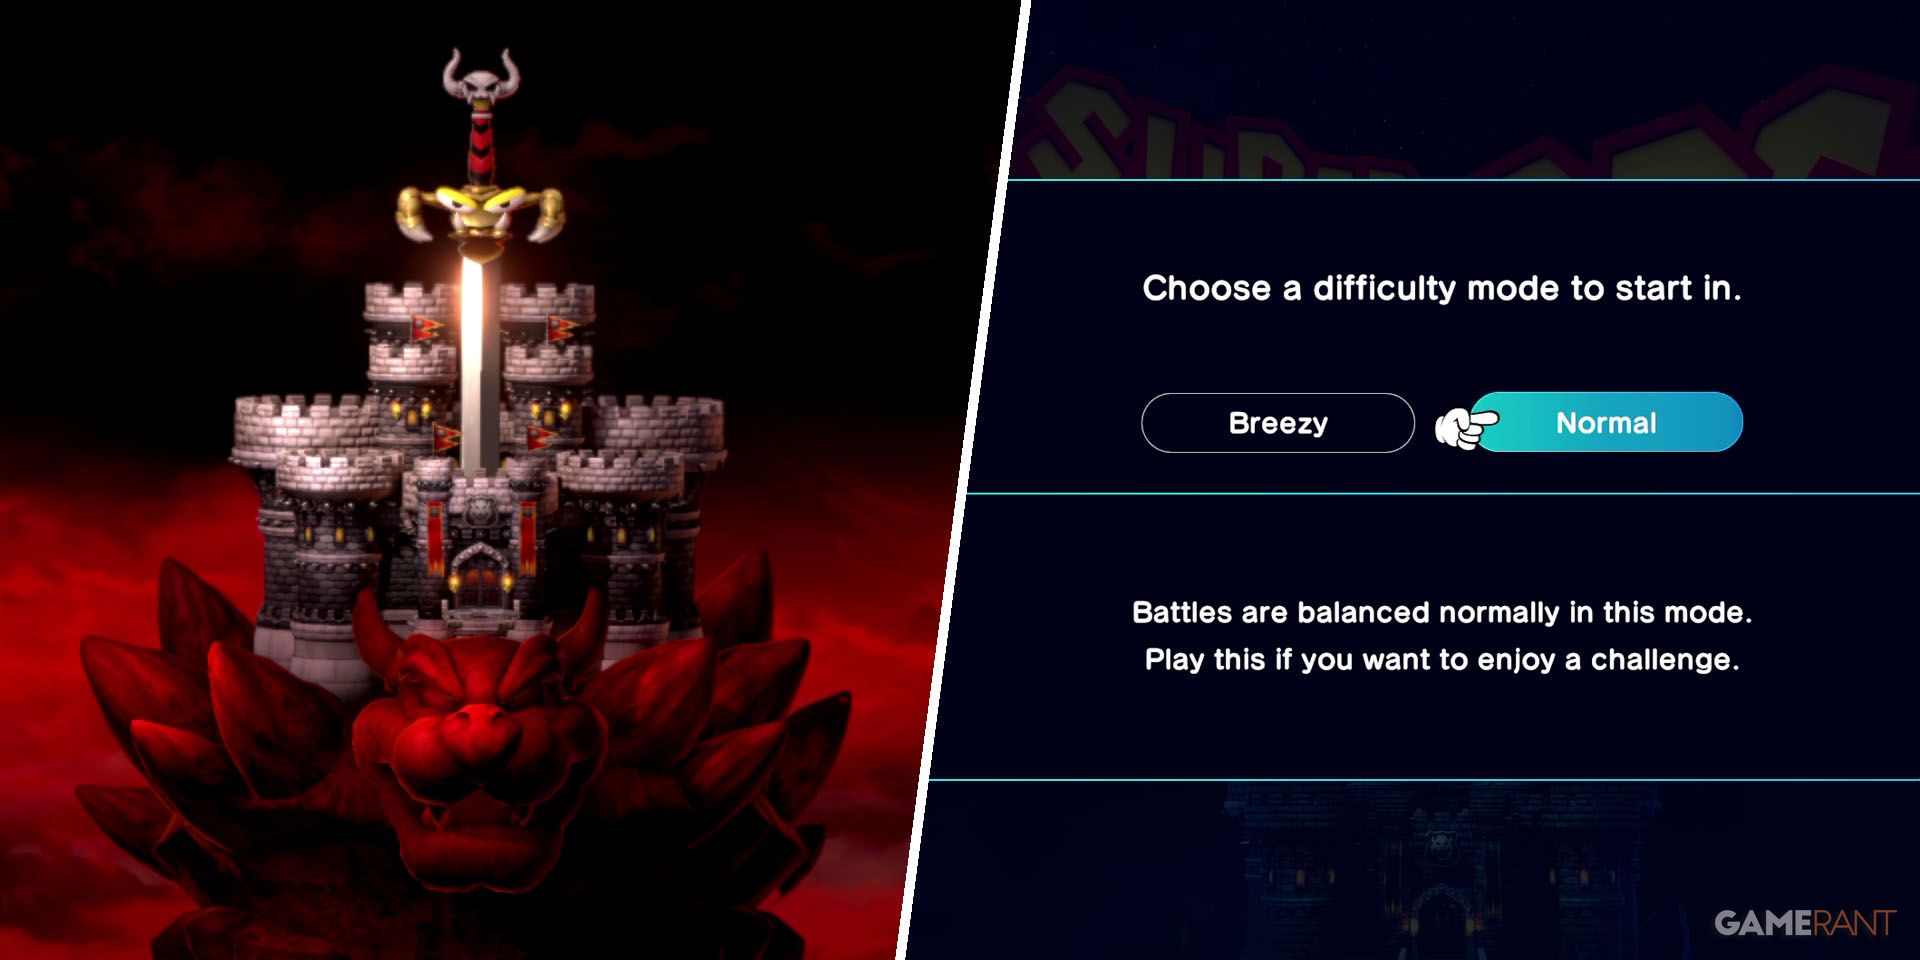 Super Mario RPG Difficulty Modes